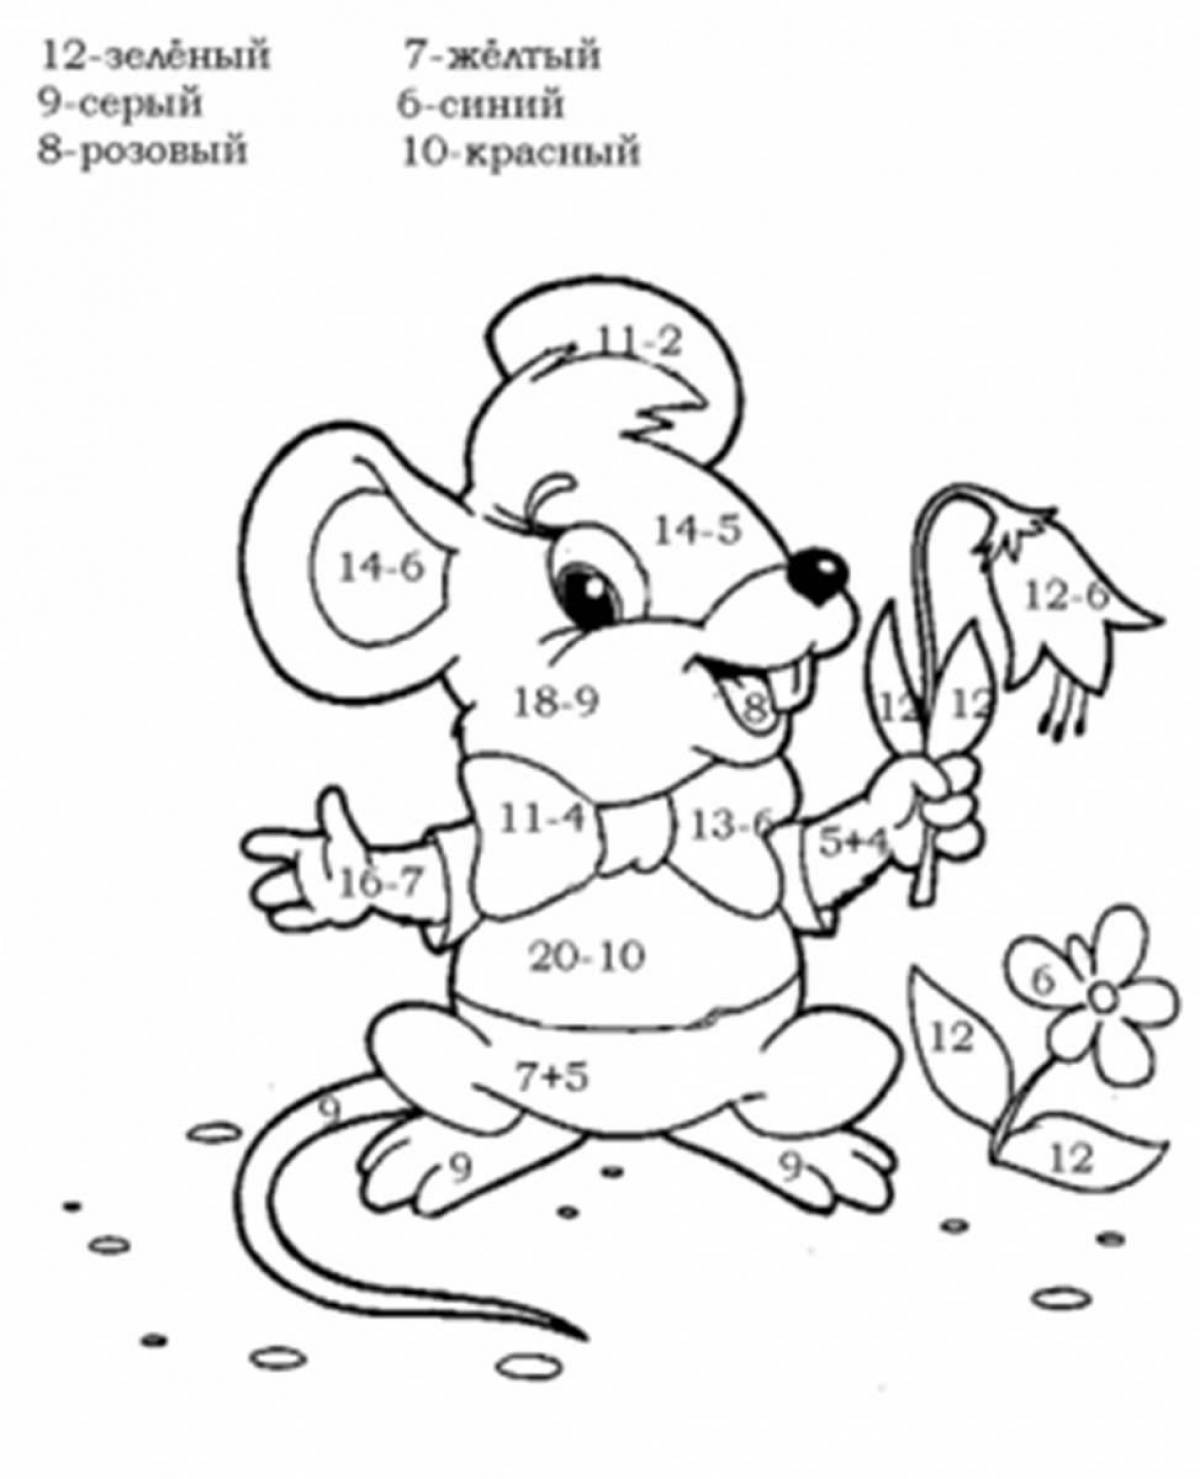 Fun math coloring book for grade 1 with examples